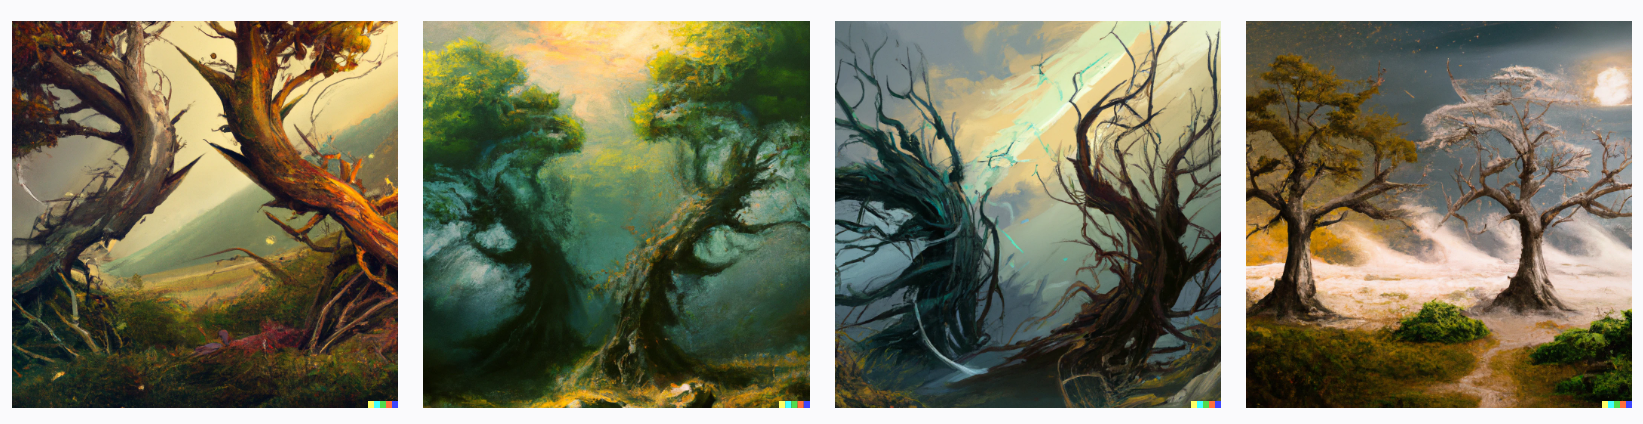 Two trees of valnor, feanor create the silmarills, Morgoth and Fingolfin fight, digital art